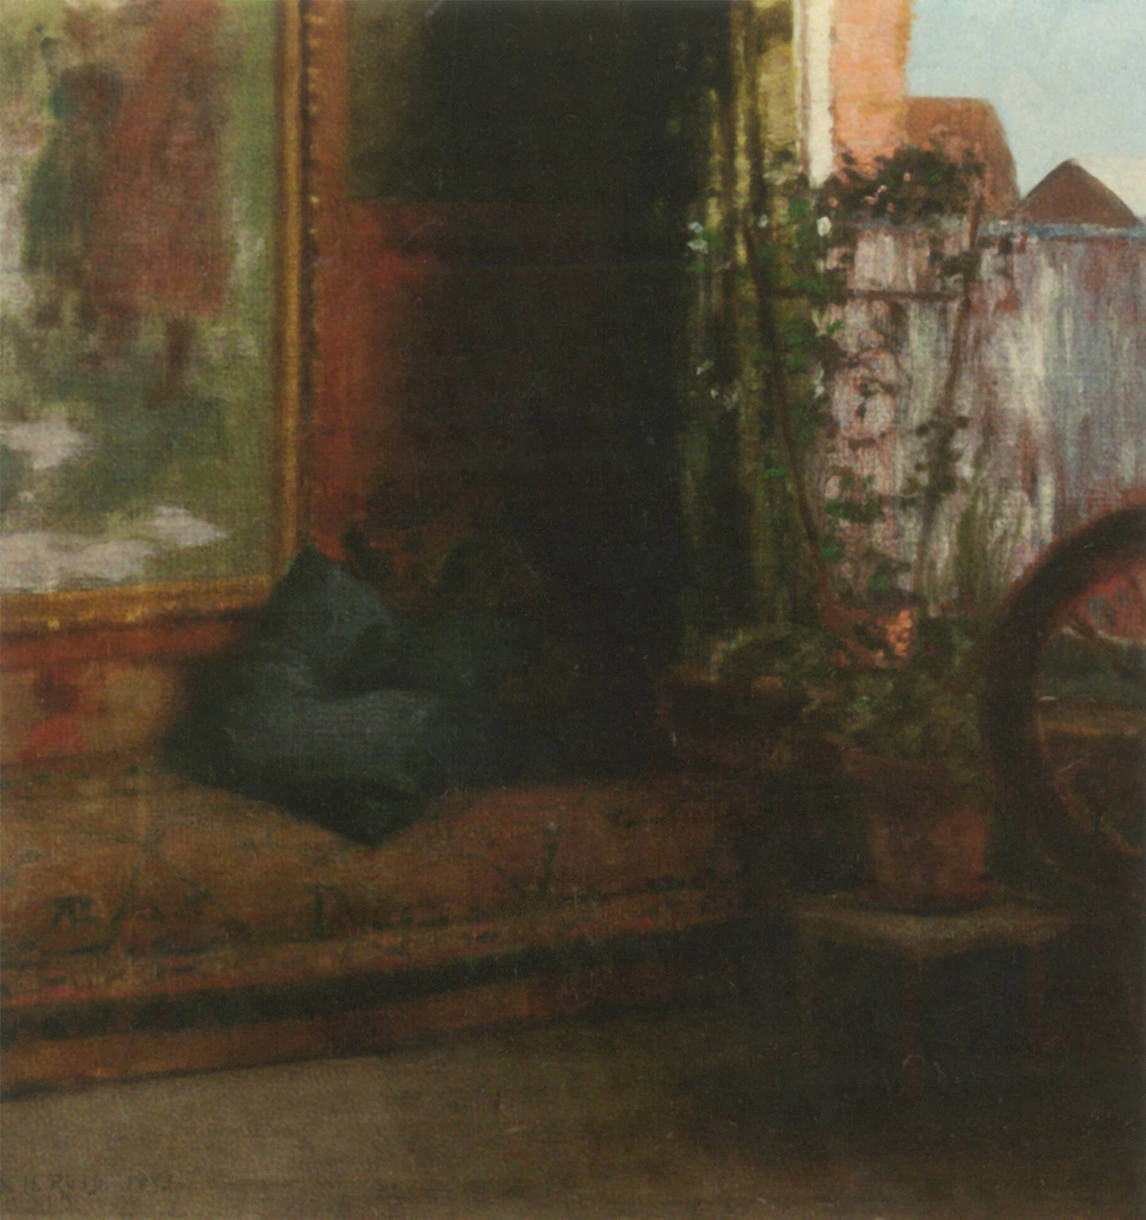 Mary Hiester Reid, Interior with Spinning Wheel (Intérieur au rouet), 1893